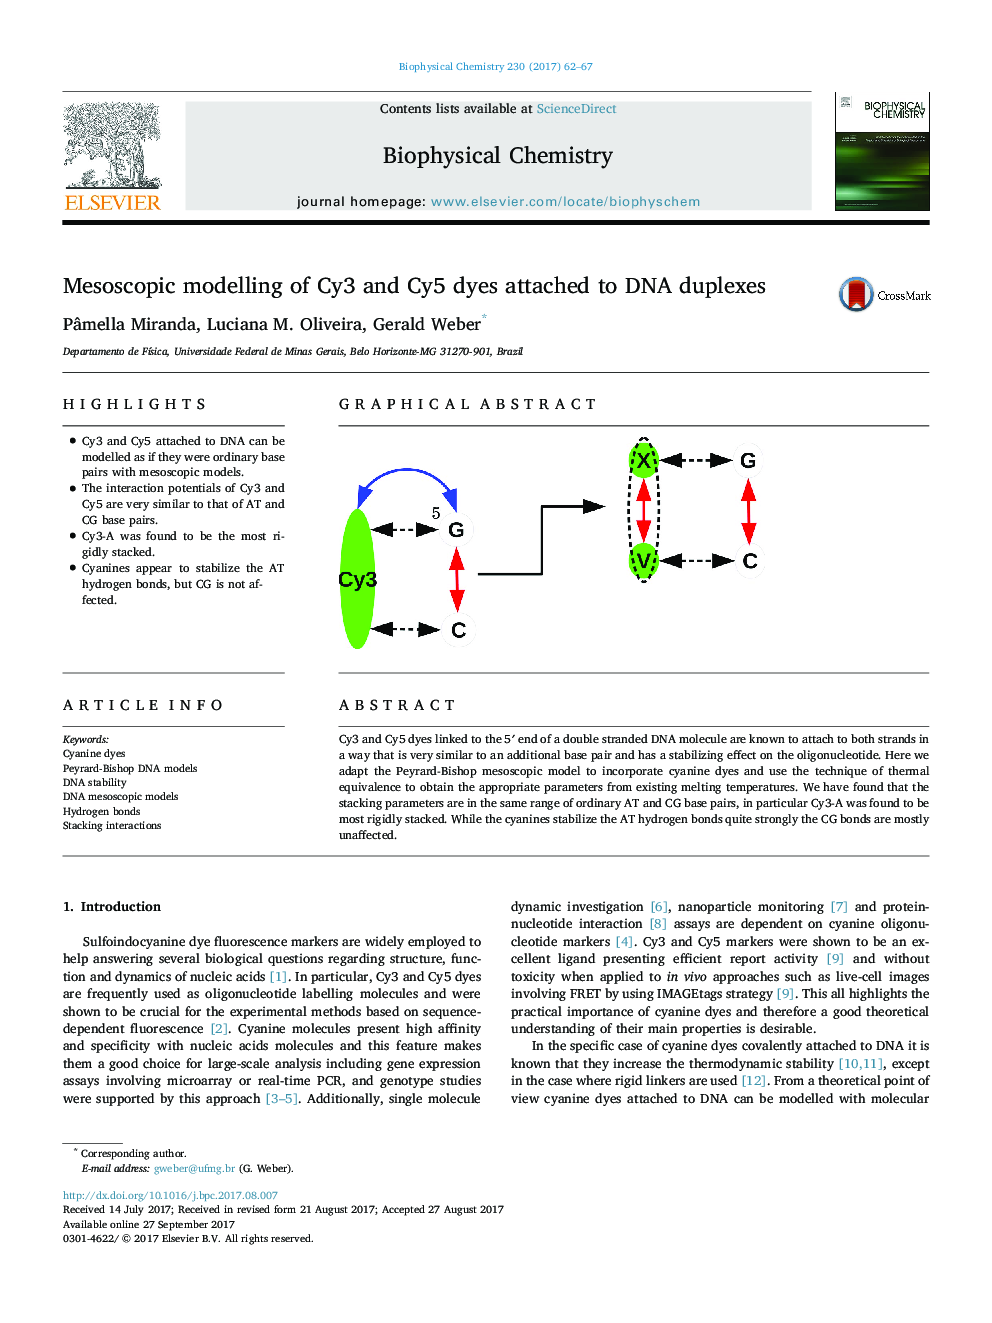 Mesoscopic modelling of Cy3 and Cy5 dyes attached to DNA duplexes